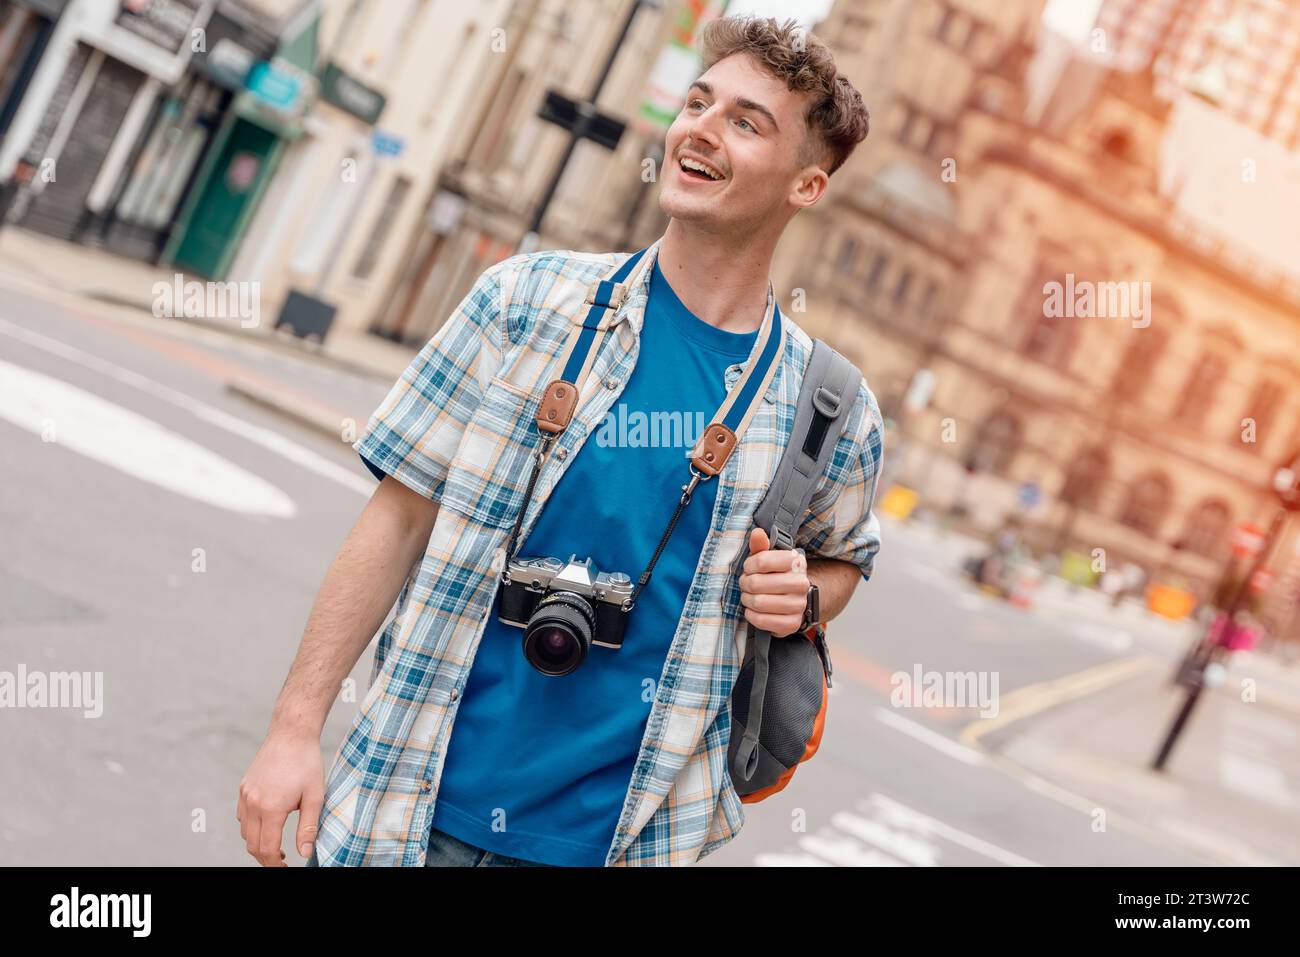 Outdoor portrait of man using a camera and taking photos in the city of Europe. Enjoying travel concept Stock Photo